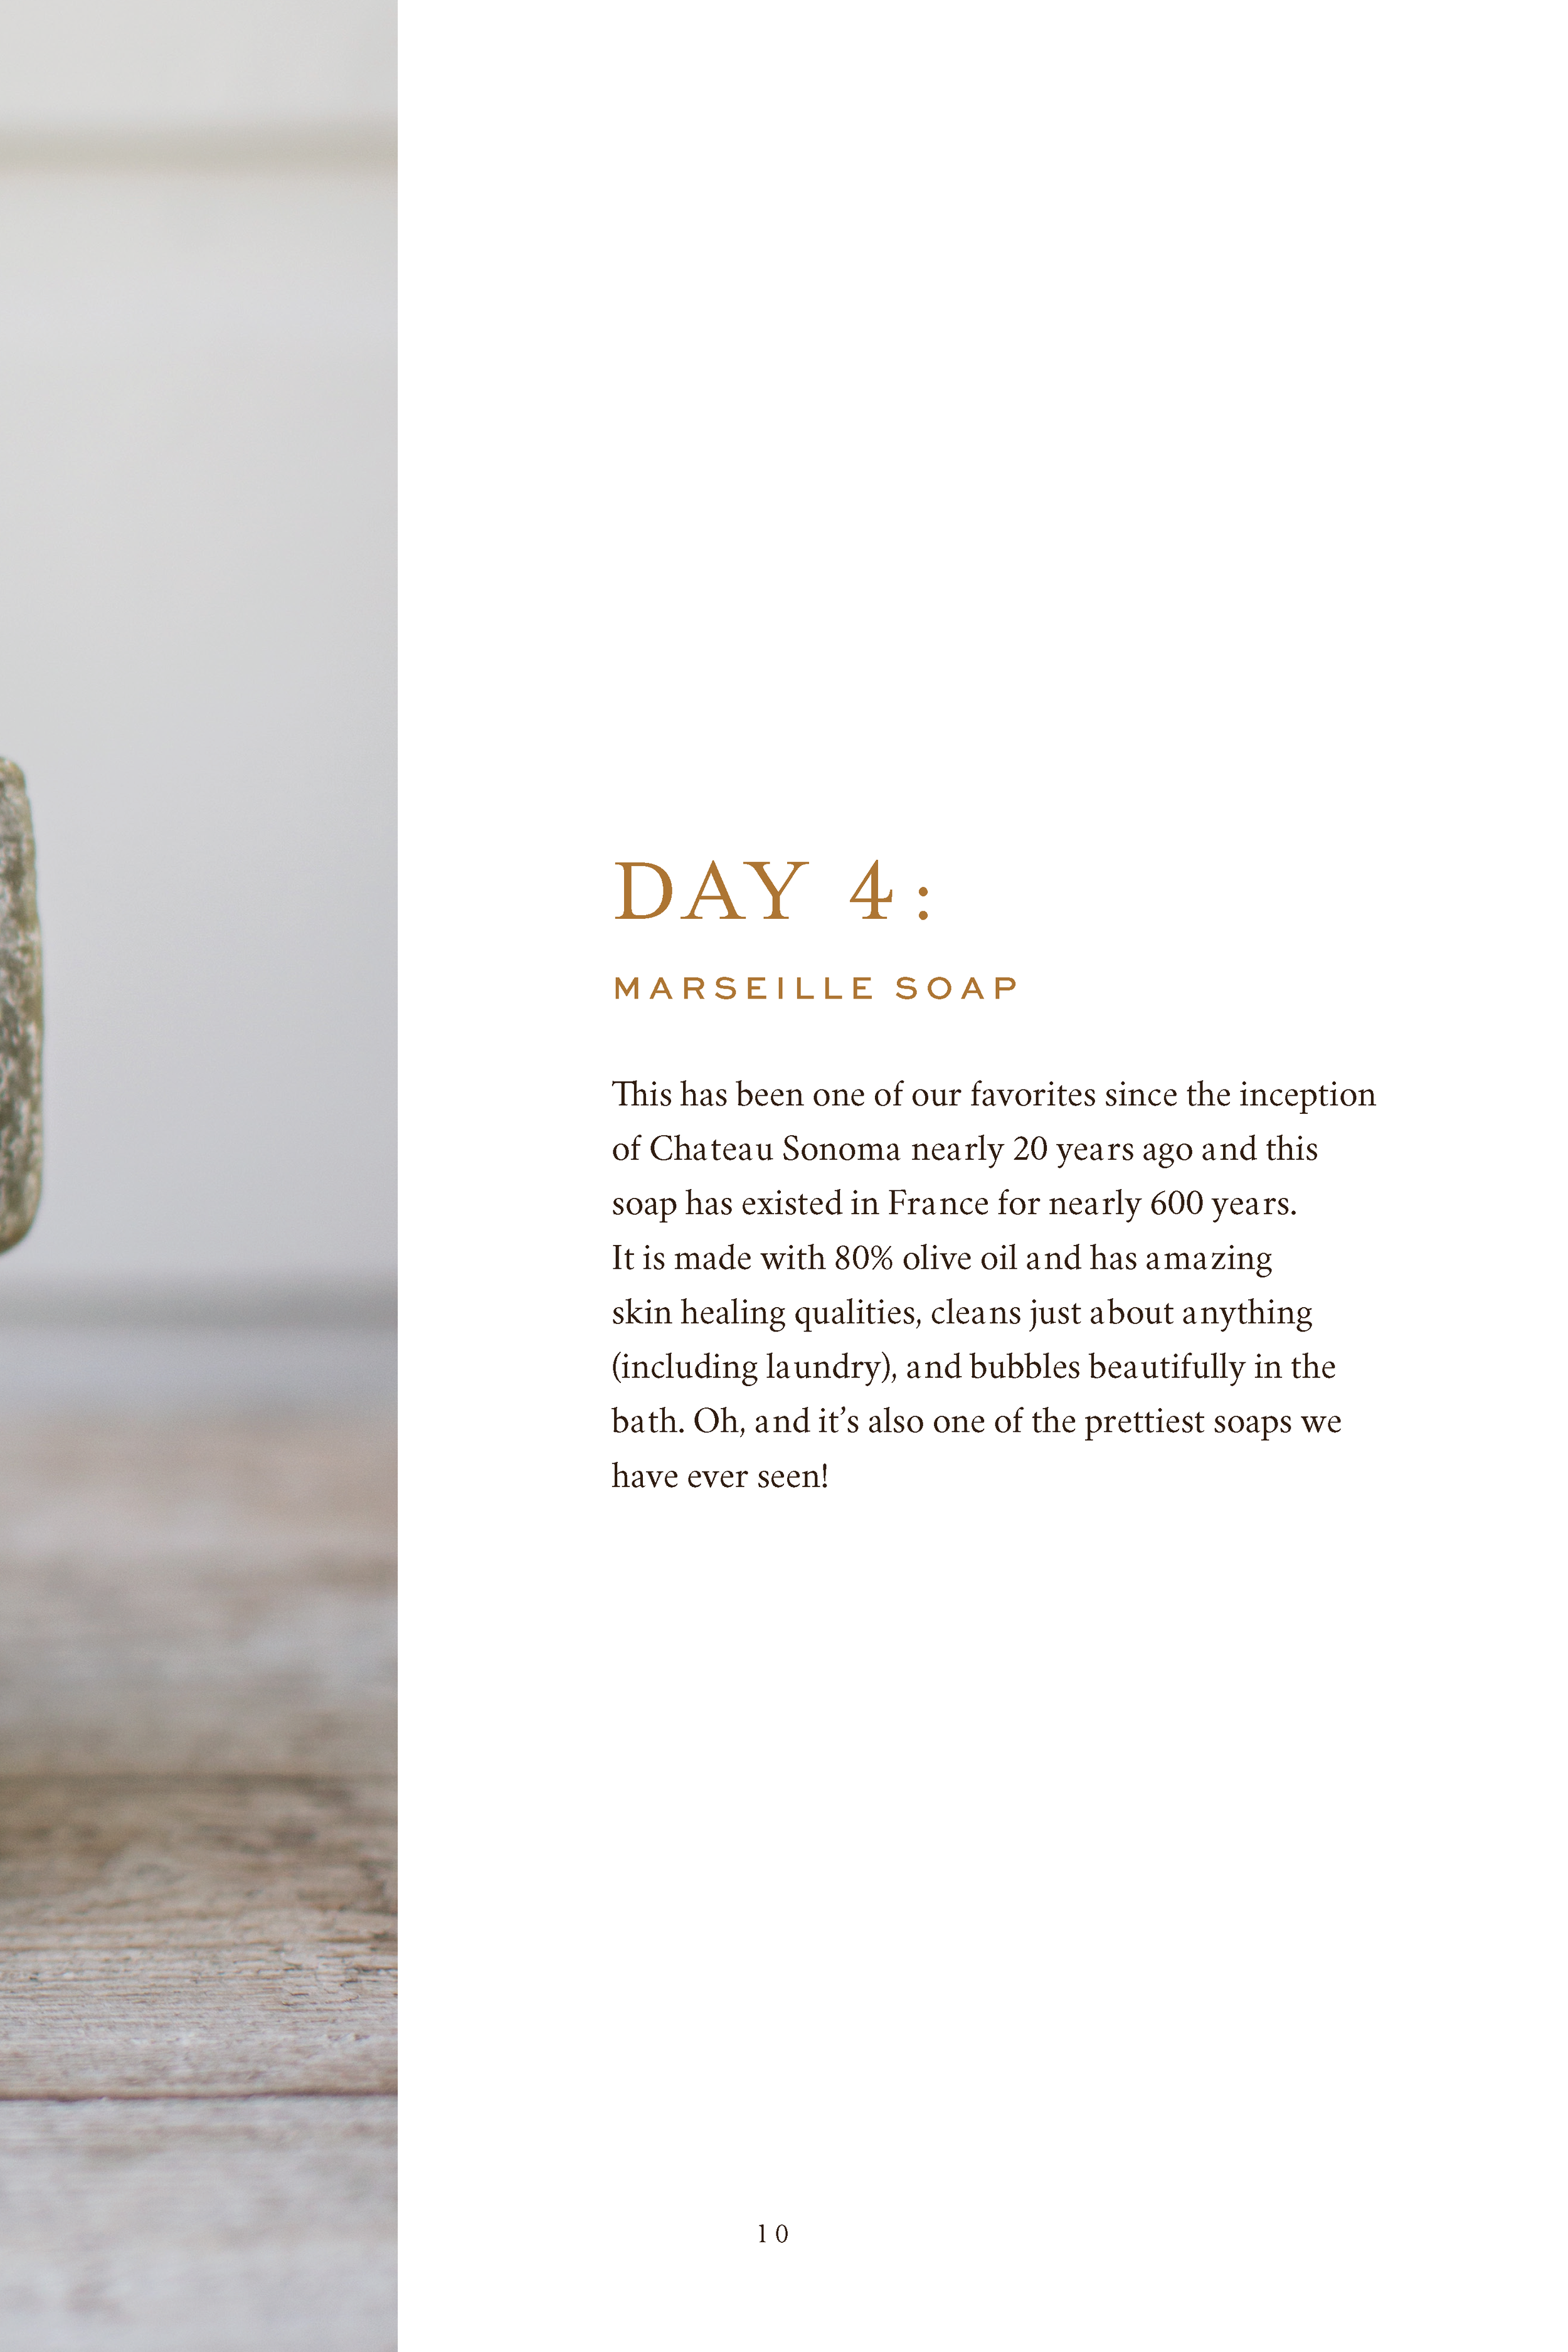 ChateauSonoma_HolidayLookbook_19_pages (1)_Page_11.png